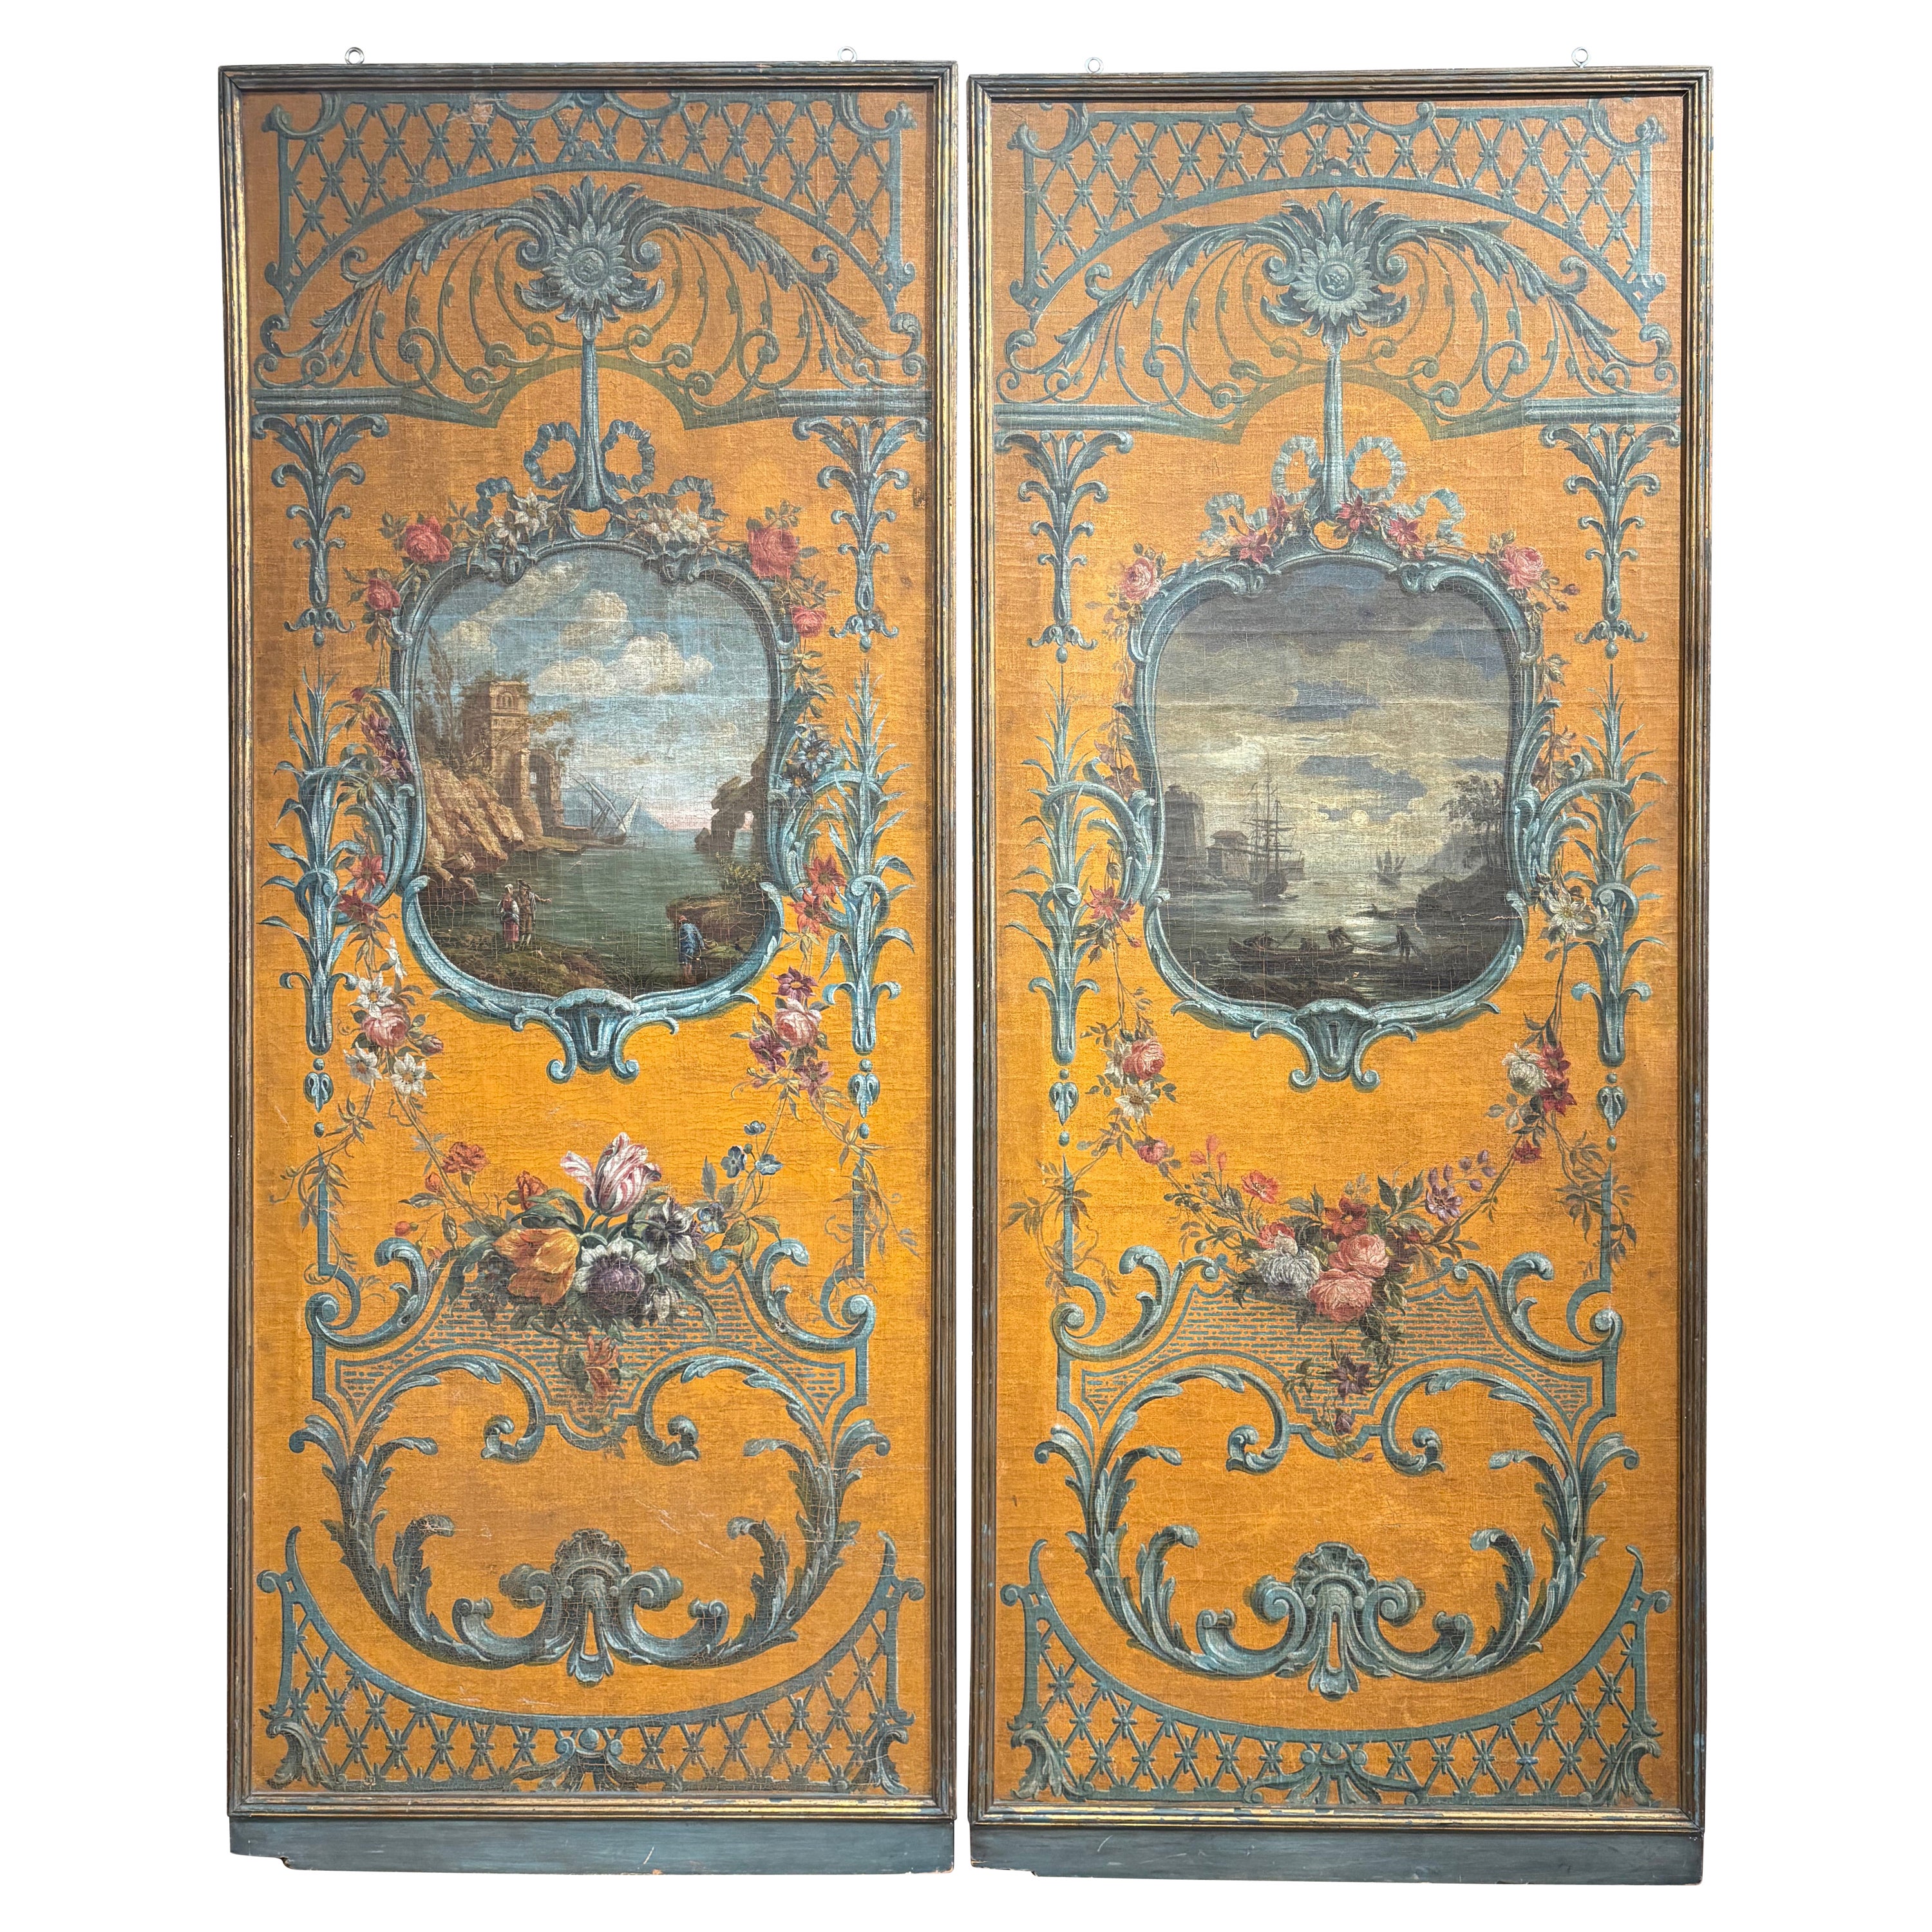 Pair of Large 19th Century Hand Painted Wall Panels on Canvas in Gilt Frames For Sale